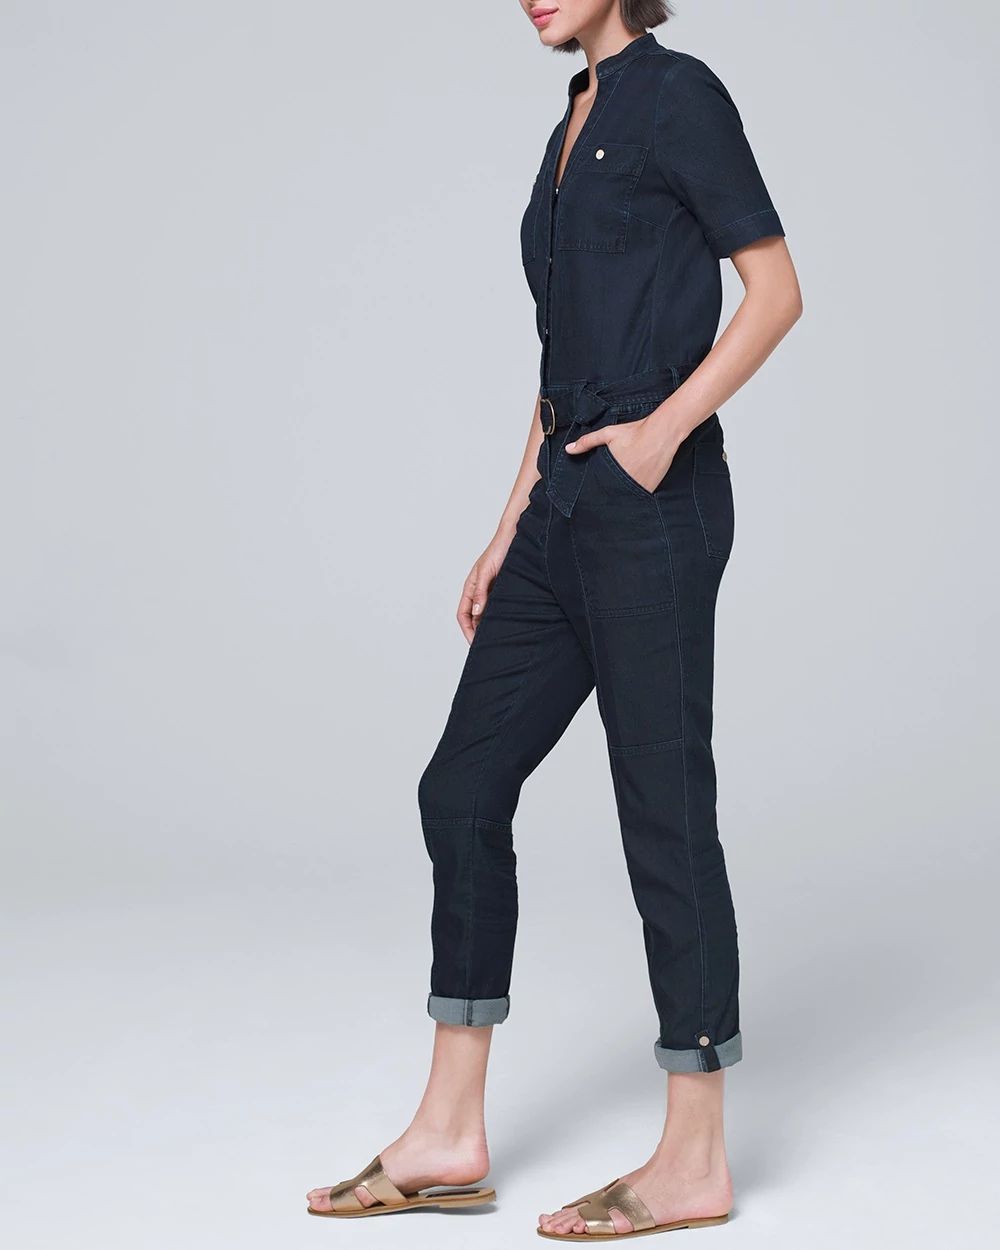 Soft Denim Cropped Jumpsuit click to view larger image.